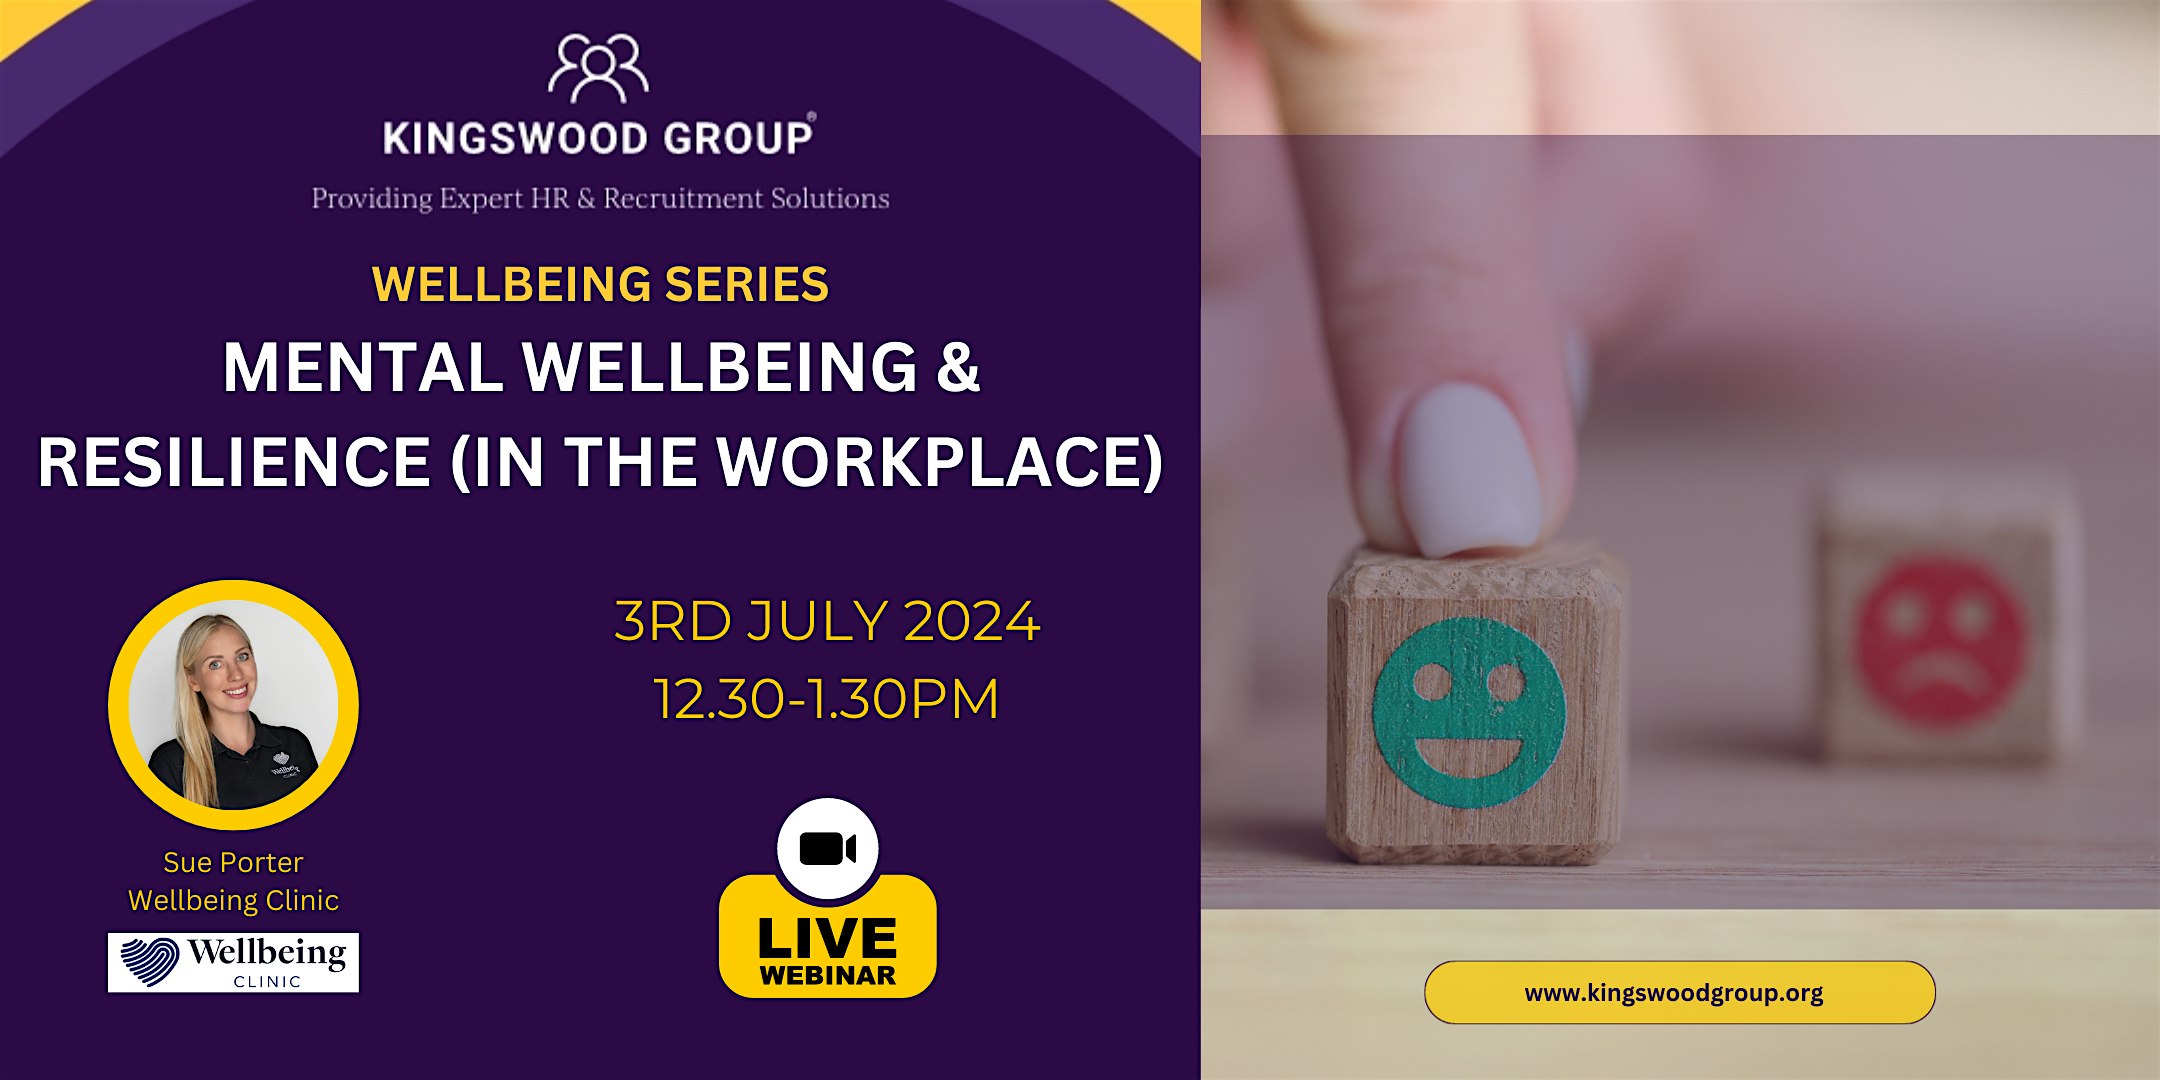 Wellbeing Series – Mental Wellbeing & Resilience (in the workplace)